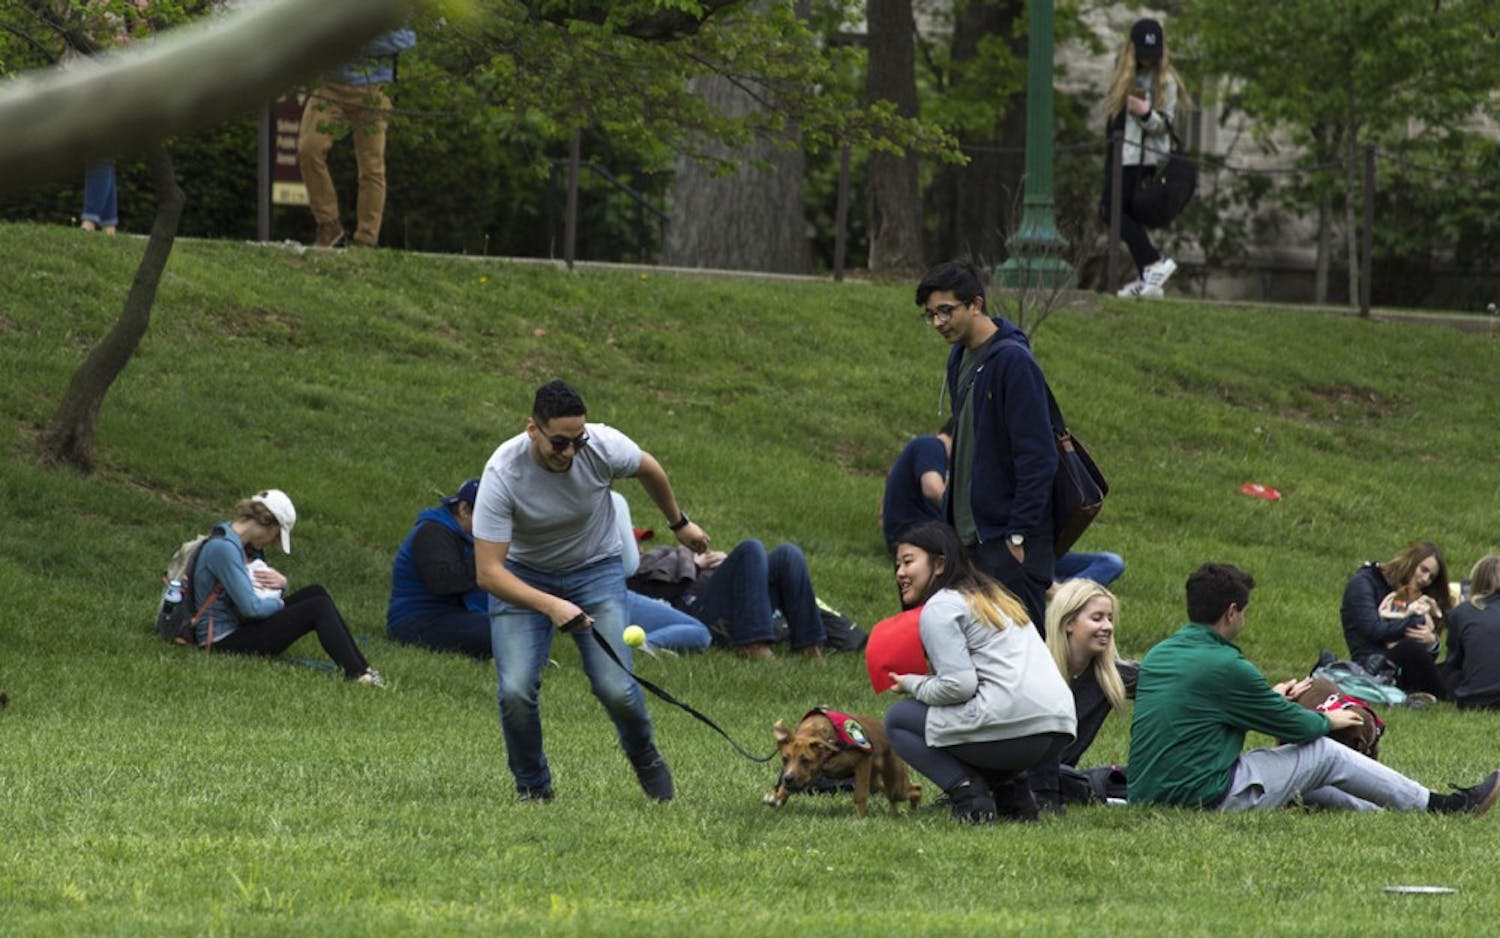 Students gathered in Dunn Meadow Thursday afternoon to participate in the annual Rent-a-Puppy event.